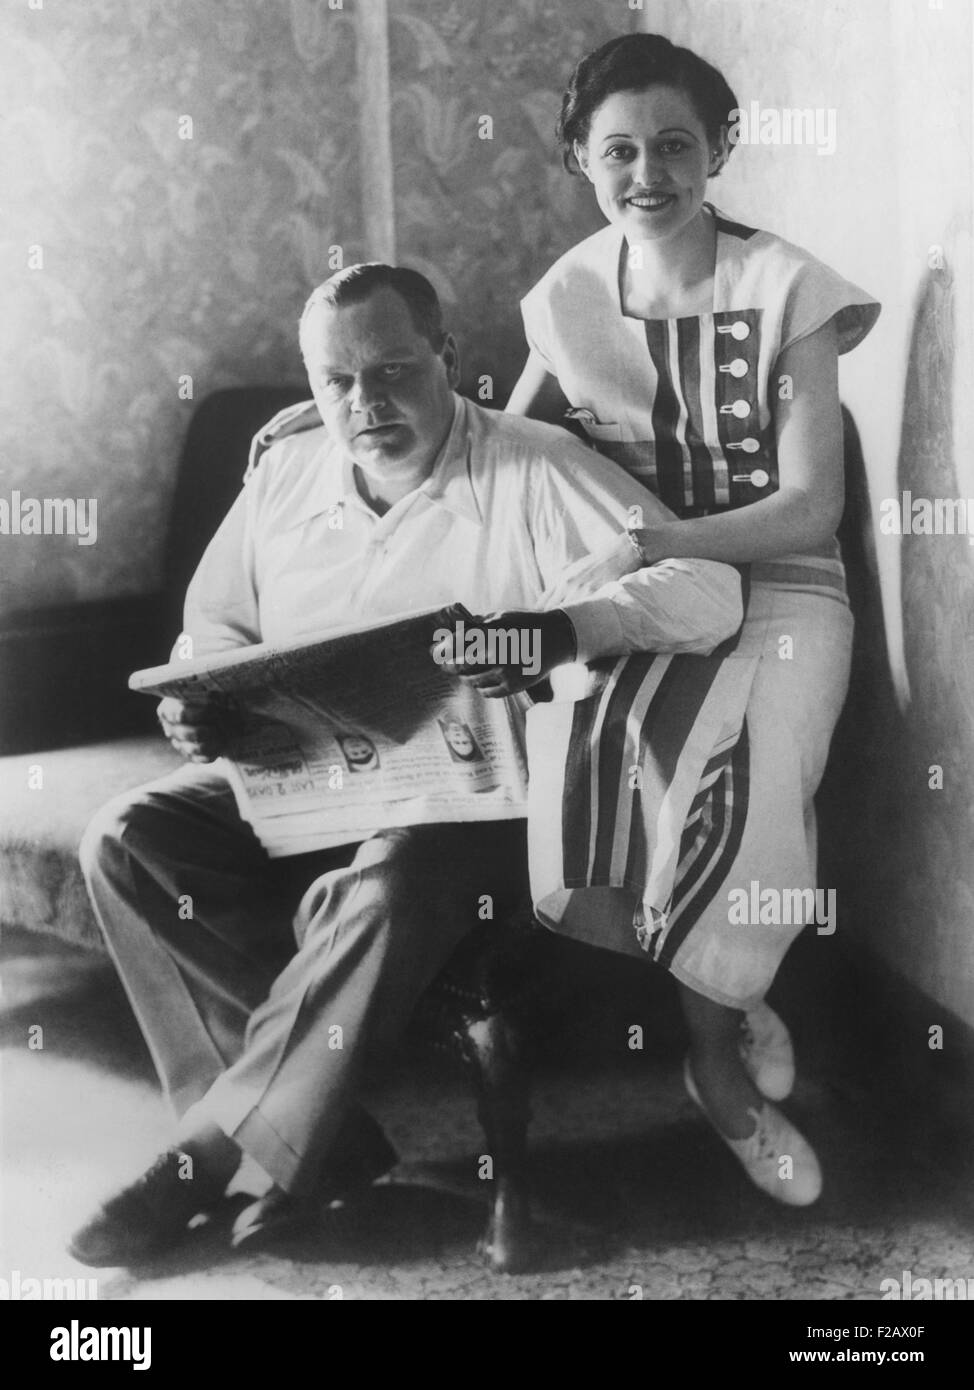 Roscoe 'Fatty' Arbuckle with his fiancée, Actress Addie McPhail. They married on June 21, 1931. (CSU 2015 11 1191) Stock Photo